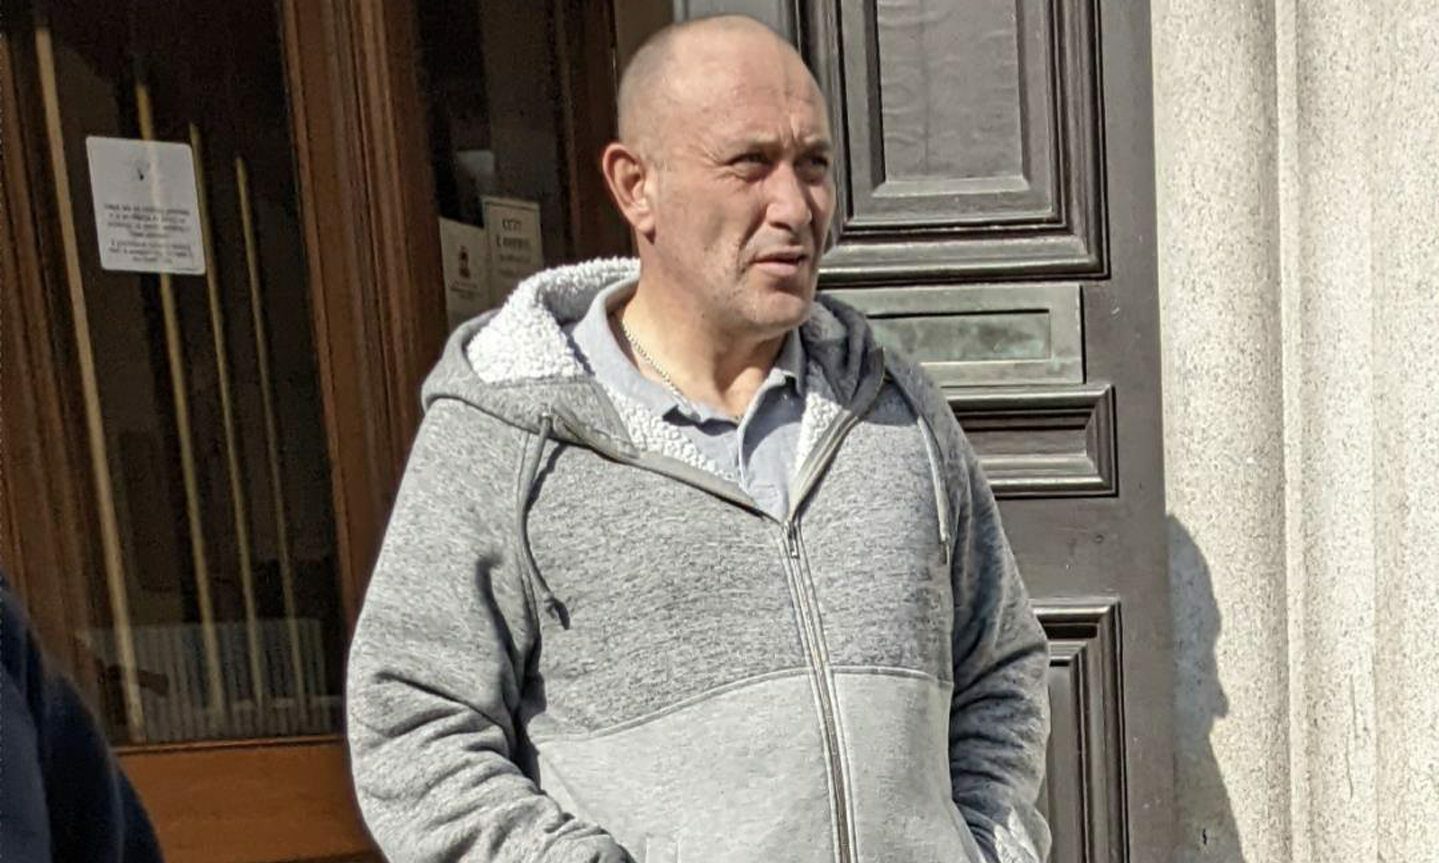 Scott Fraser carried out a catalogue of abuse against his former partner.